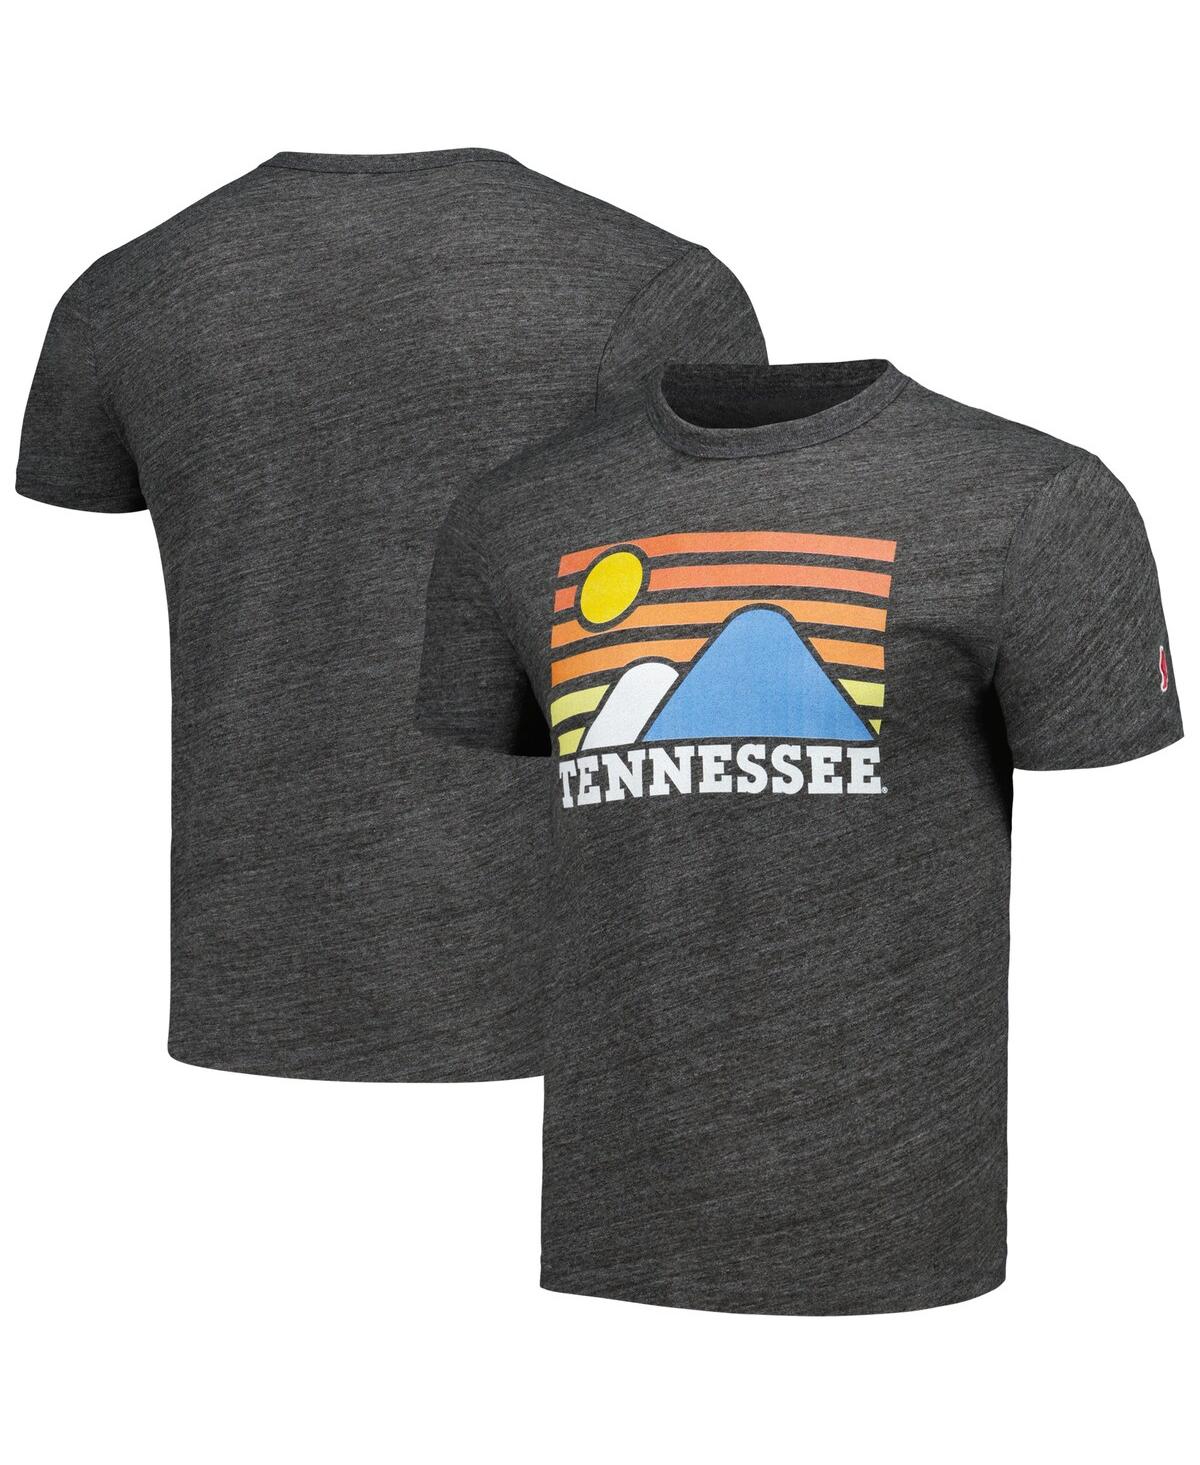 Men's League Collegiate Wear Heather Charcoal Distressed Tennessee Volunteers Hyper Local Victory Falls Tri-BlendÂ T-shirt - Heather Charcoal